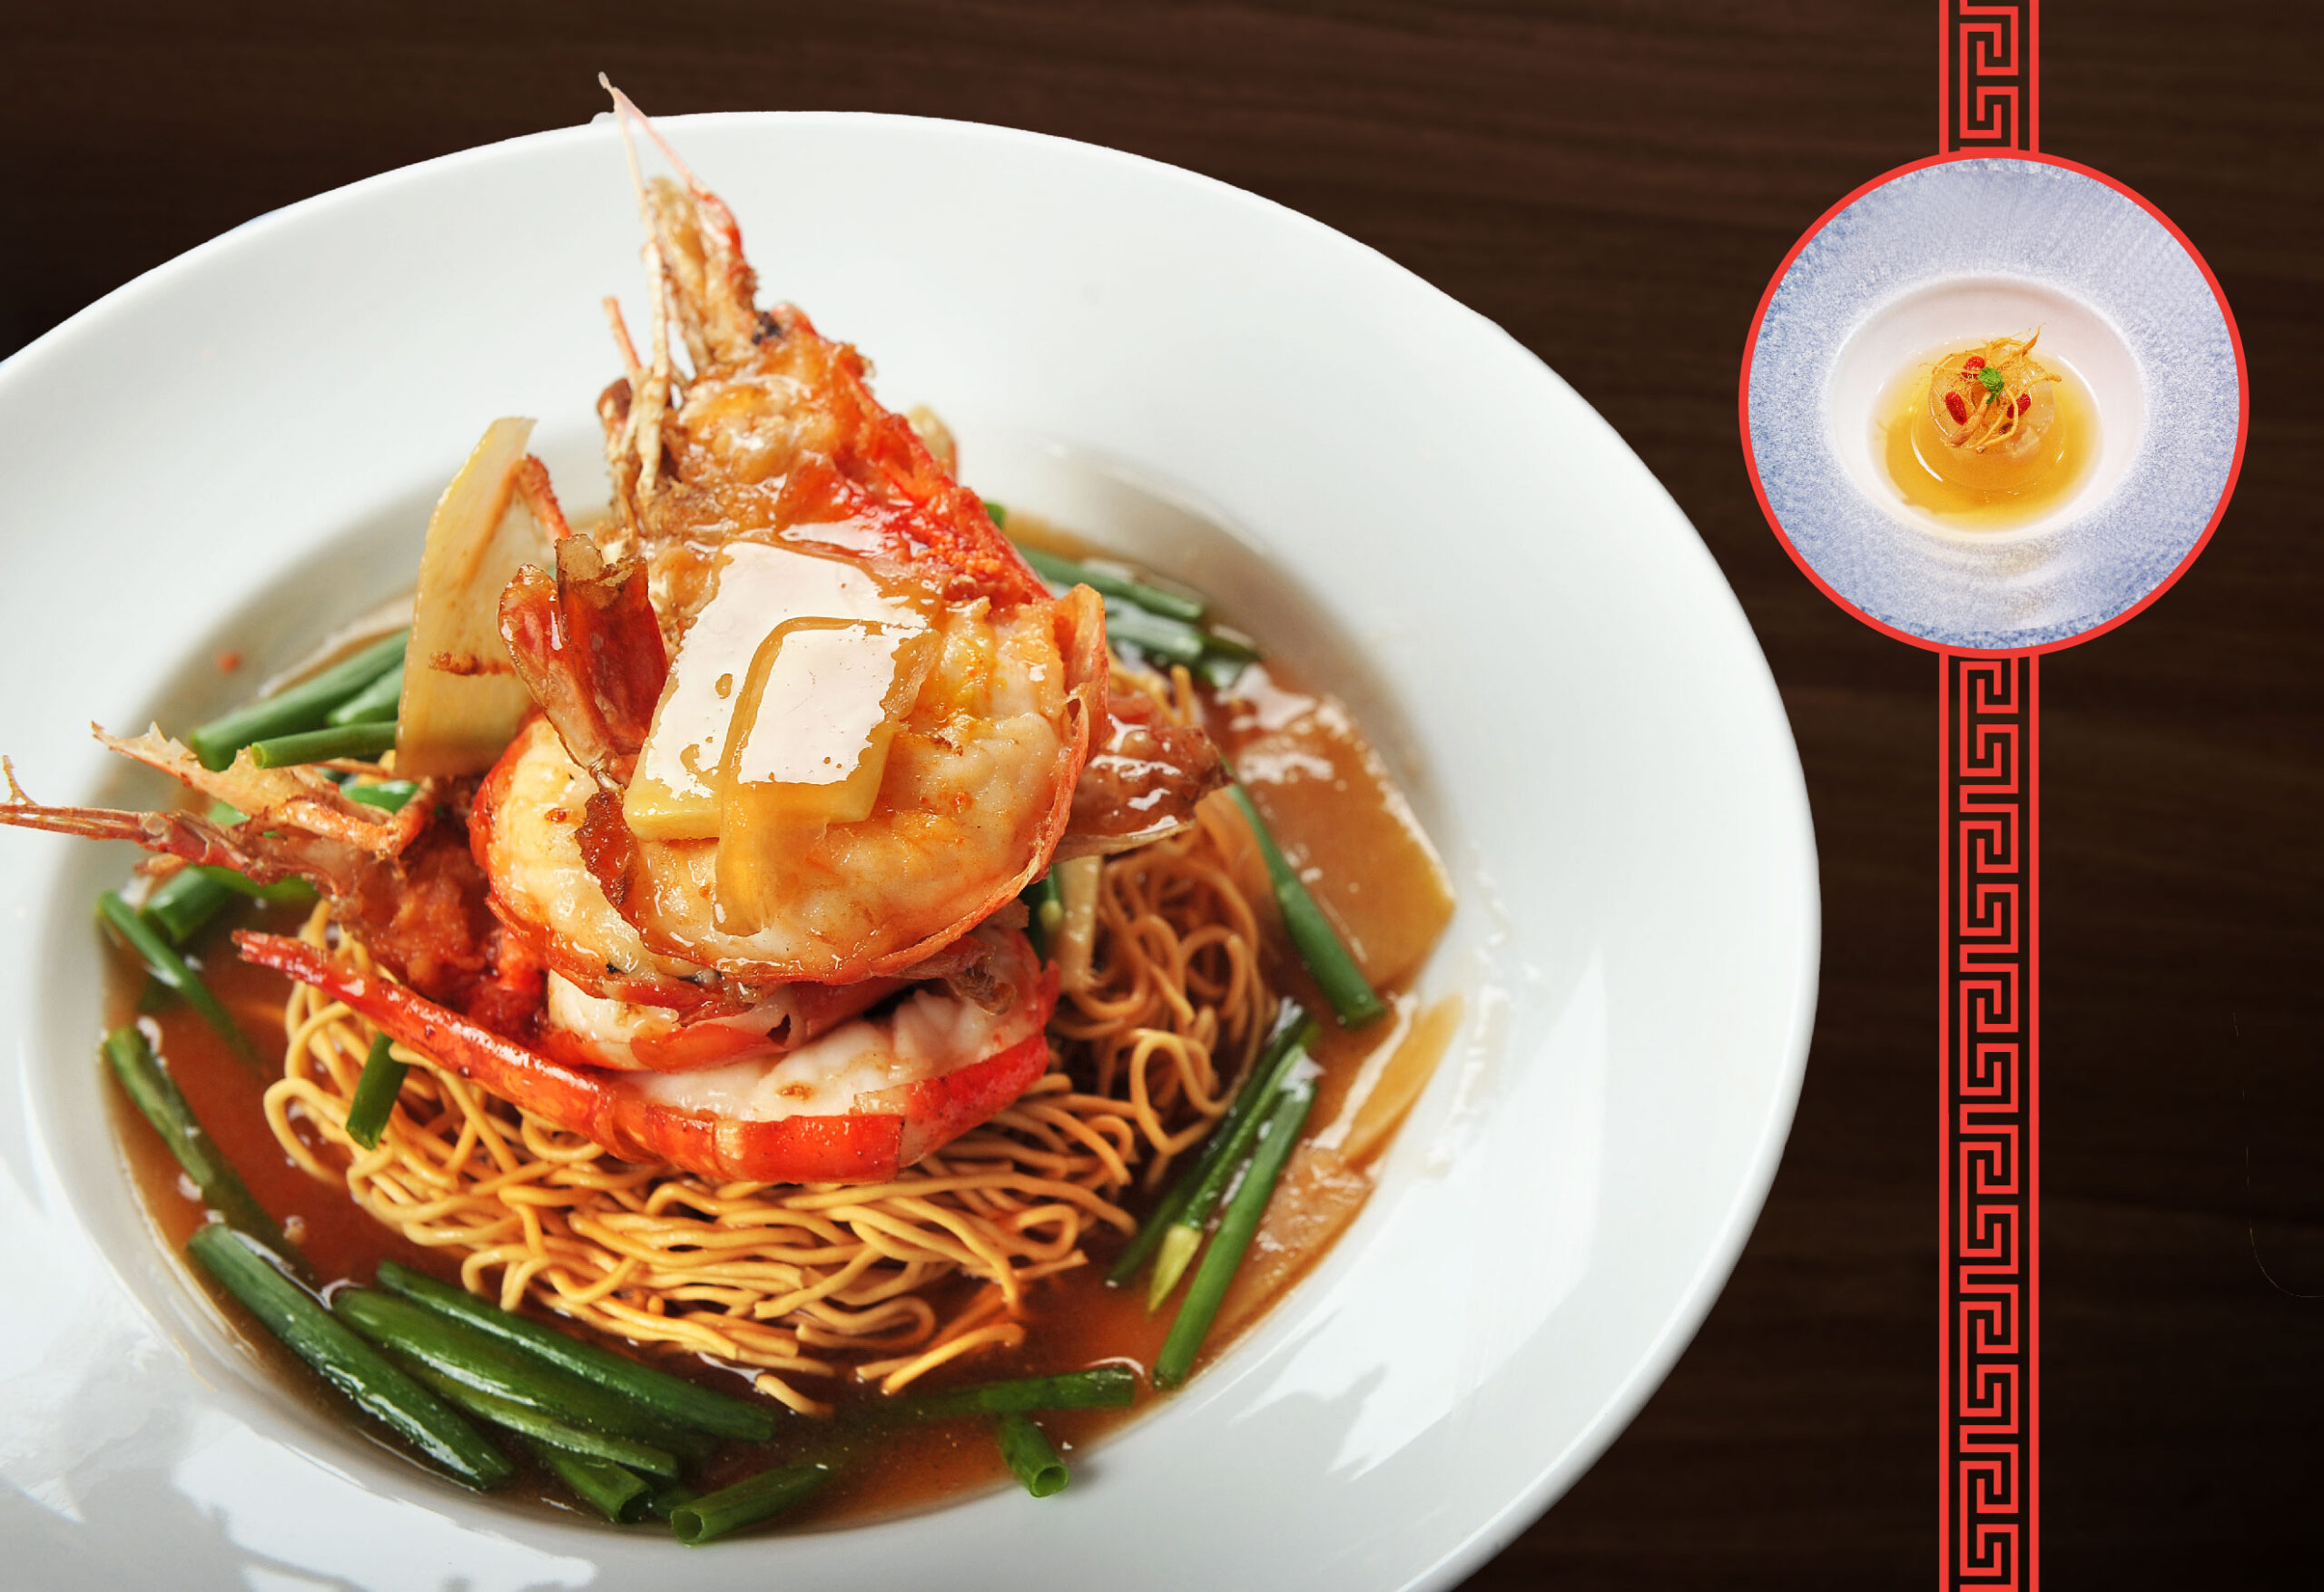 A plate of Sang Har Prawn Noodles and a plate of Collagen Jelly with Ginseng is edited into the photo.